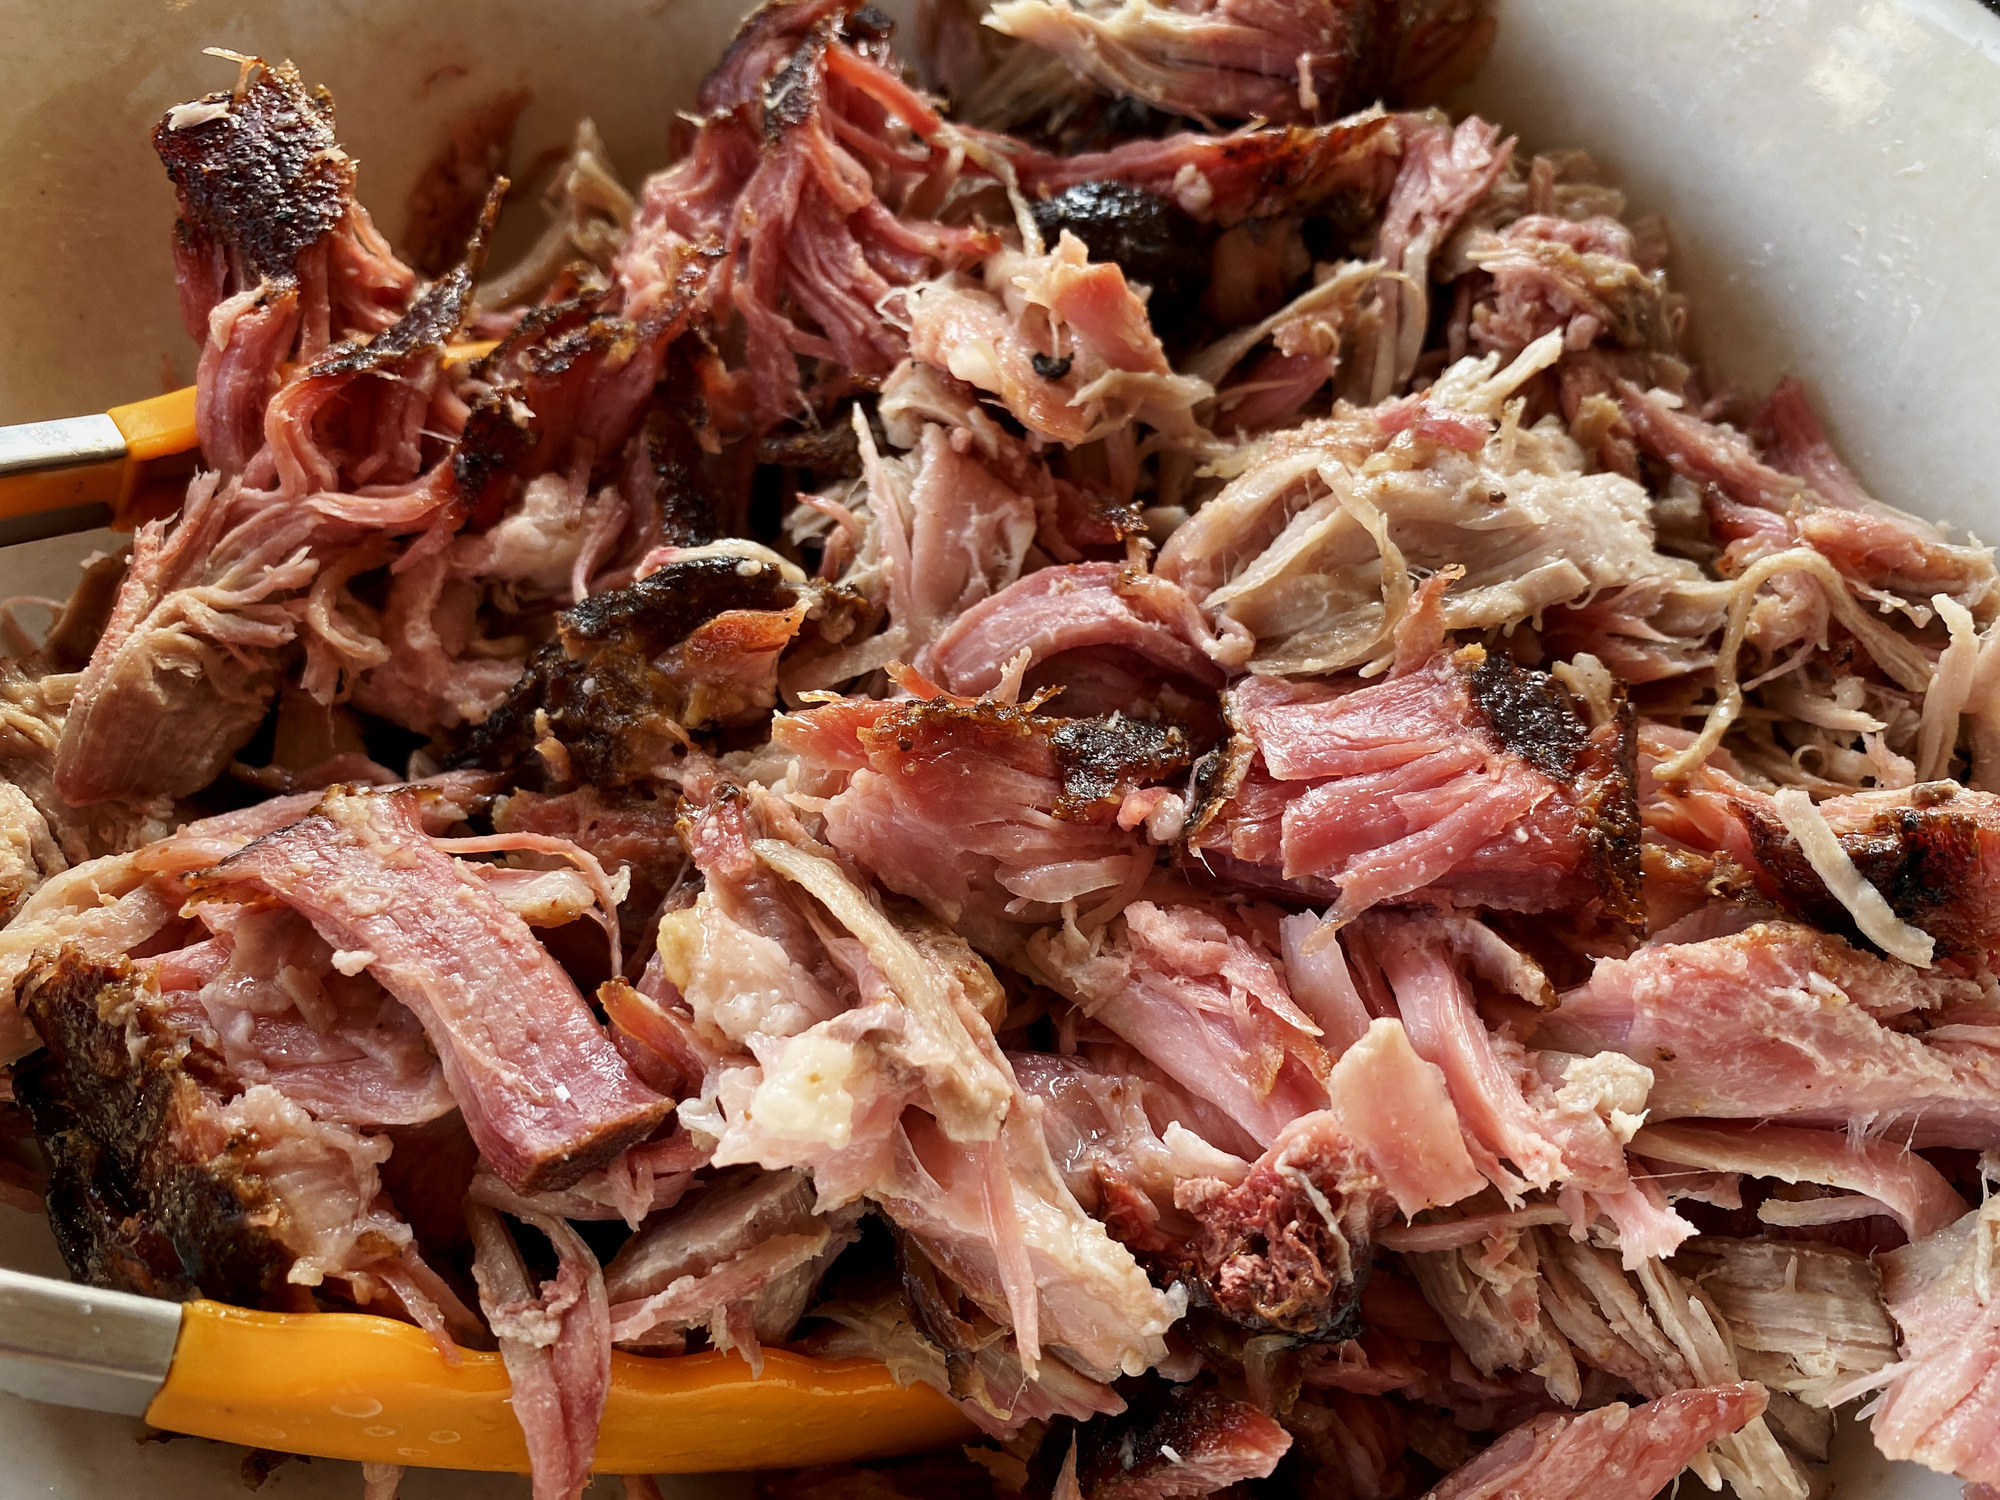 A plate of pulled pork.